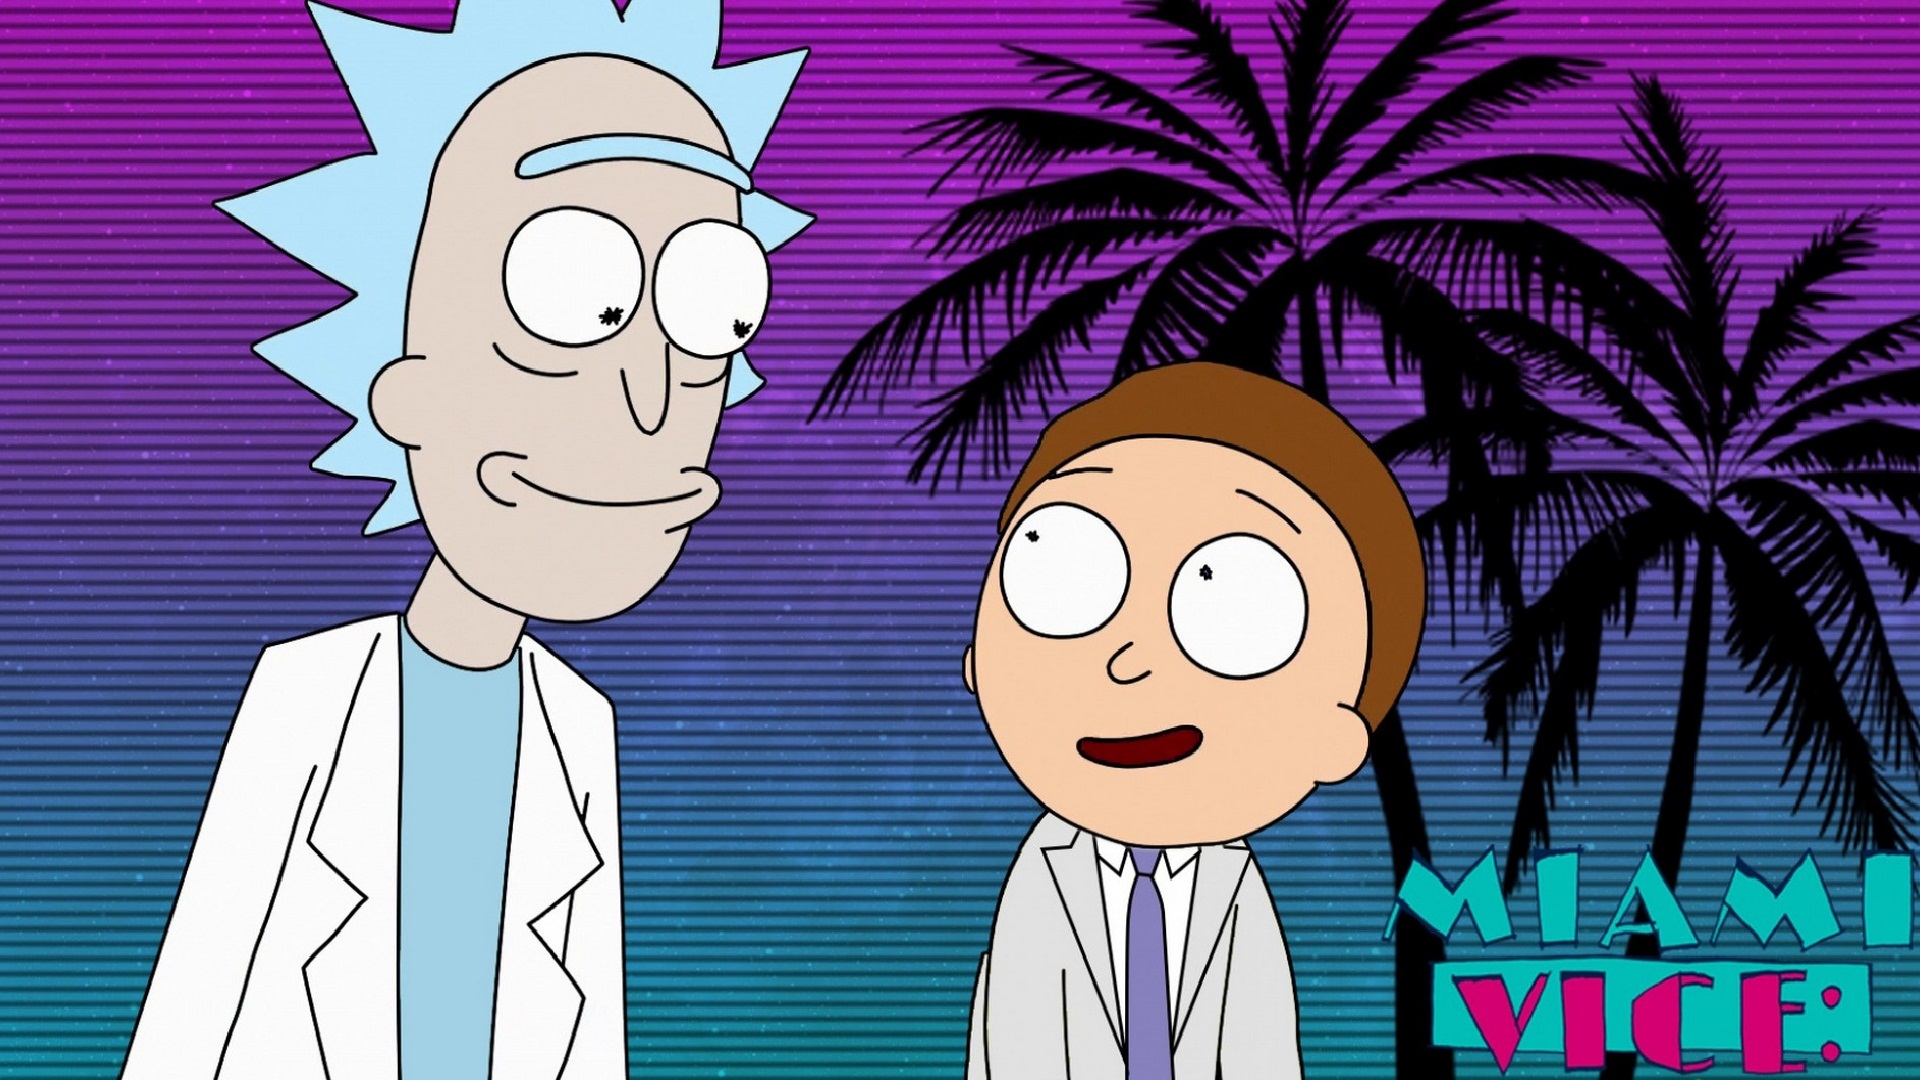 Cartoon Network Rick and Morty Wallpaper with image resolution 1920x1080 pixel. You can use this wallpaper as background for your desktop Computer Screensavers, Android or iPhone smartphones